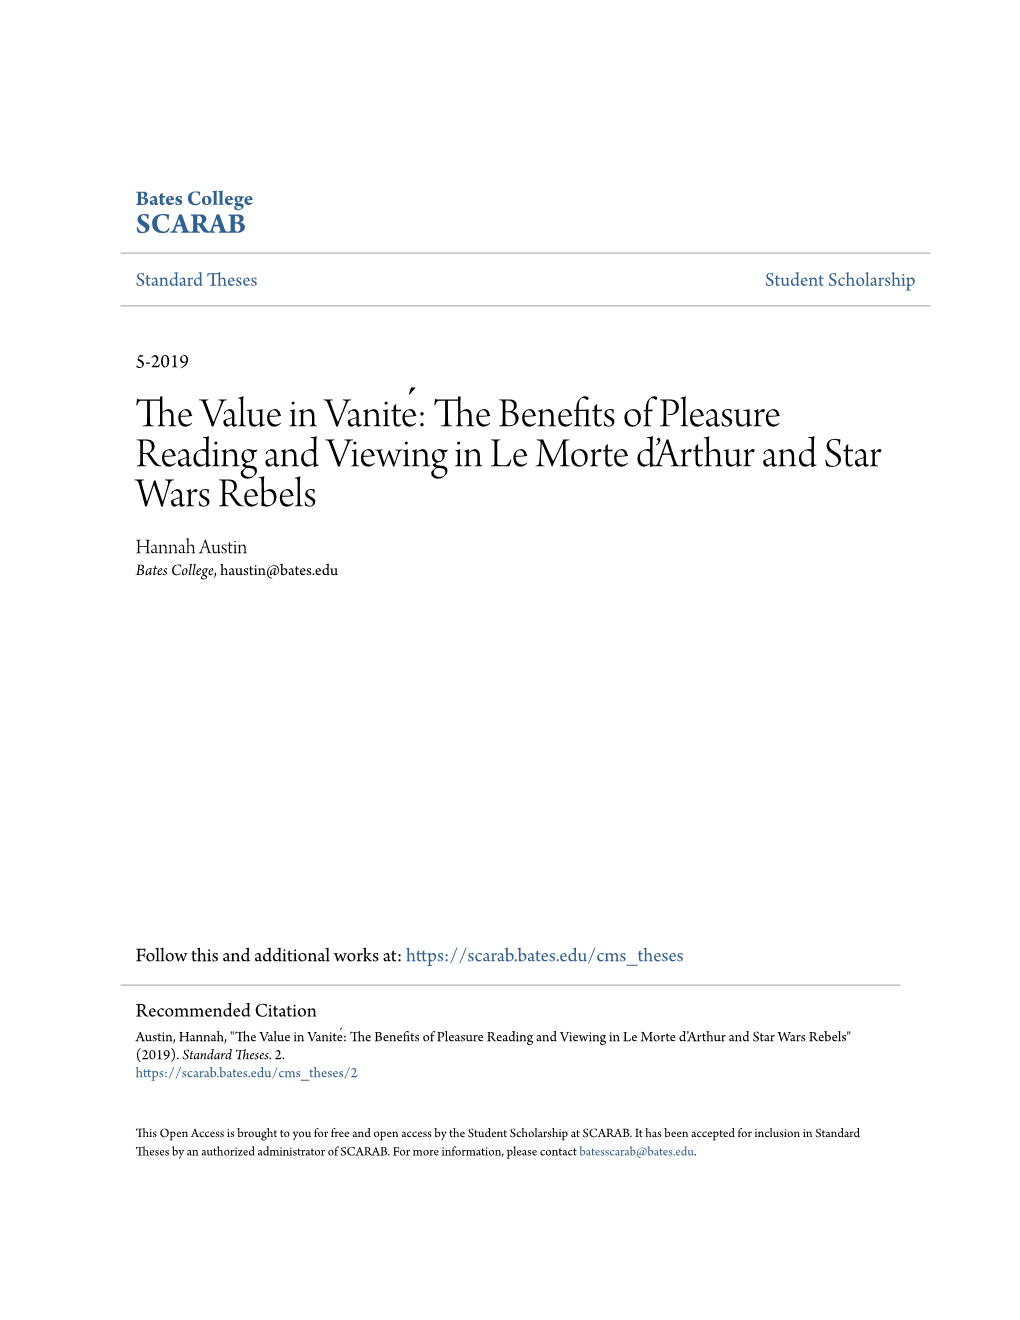 The Value in Vanité: the Benefits of Pleasure Reading and Viewing in Le Morte D'arthur and Star Wars Rebels